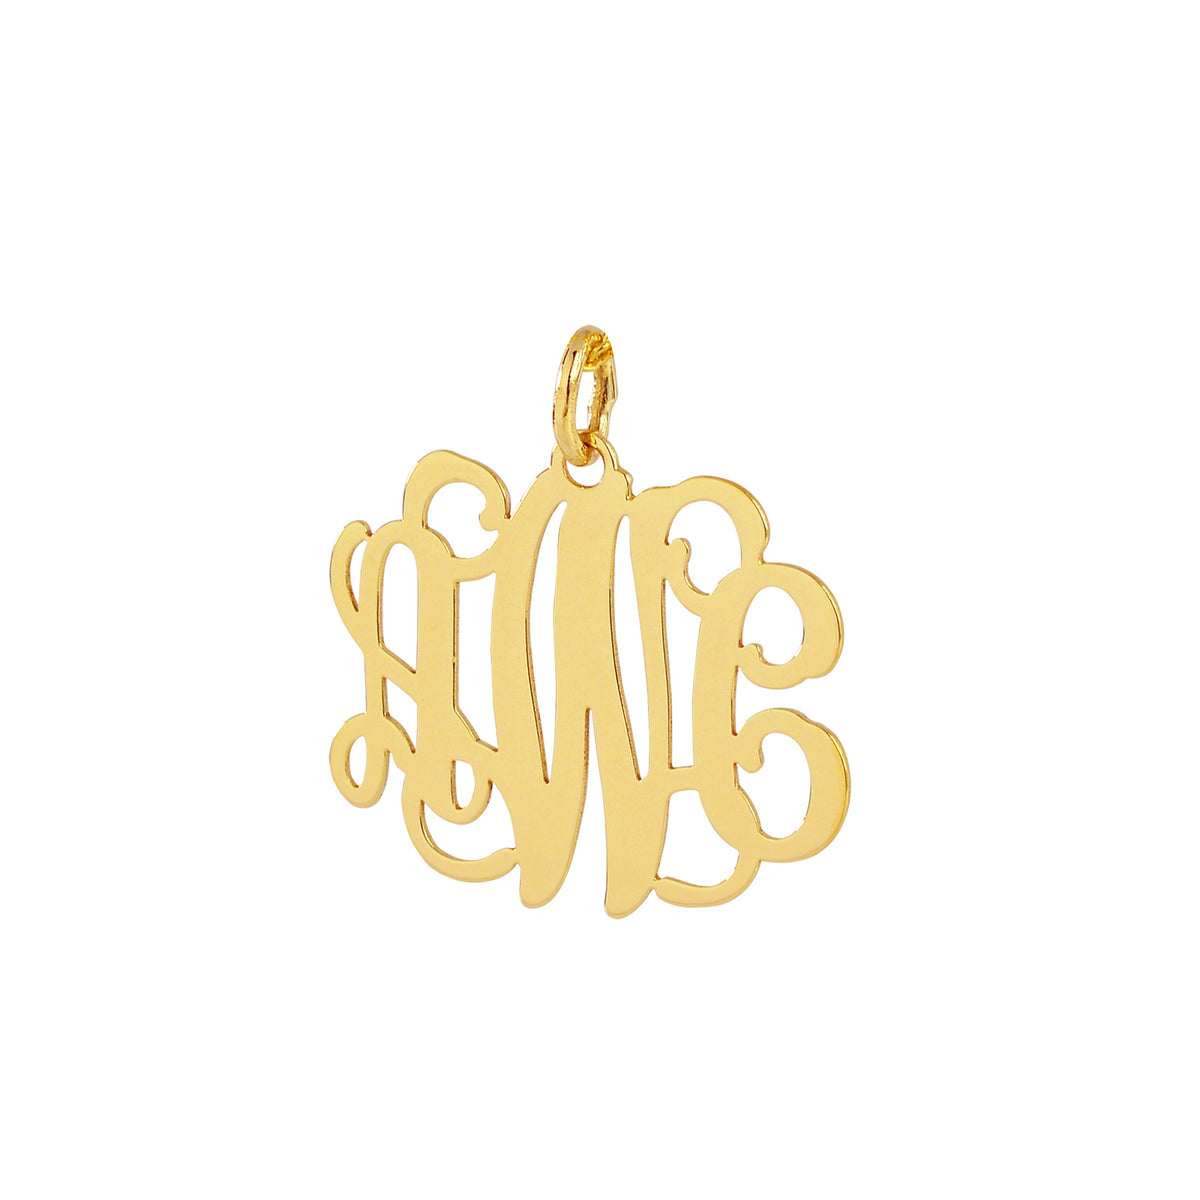 Small Solid 10k and 14k Gold 3 Initials Monogram Pendant .75 inch wide Personalized Charm Pendant